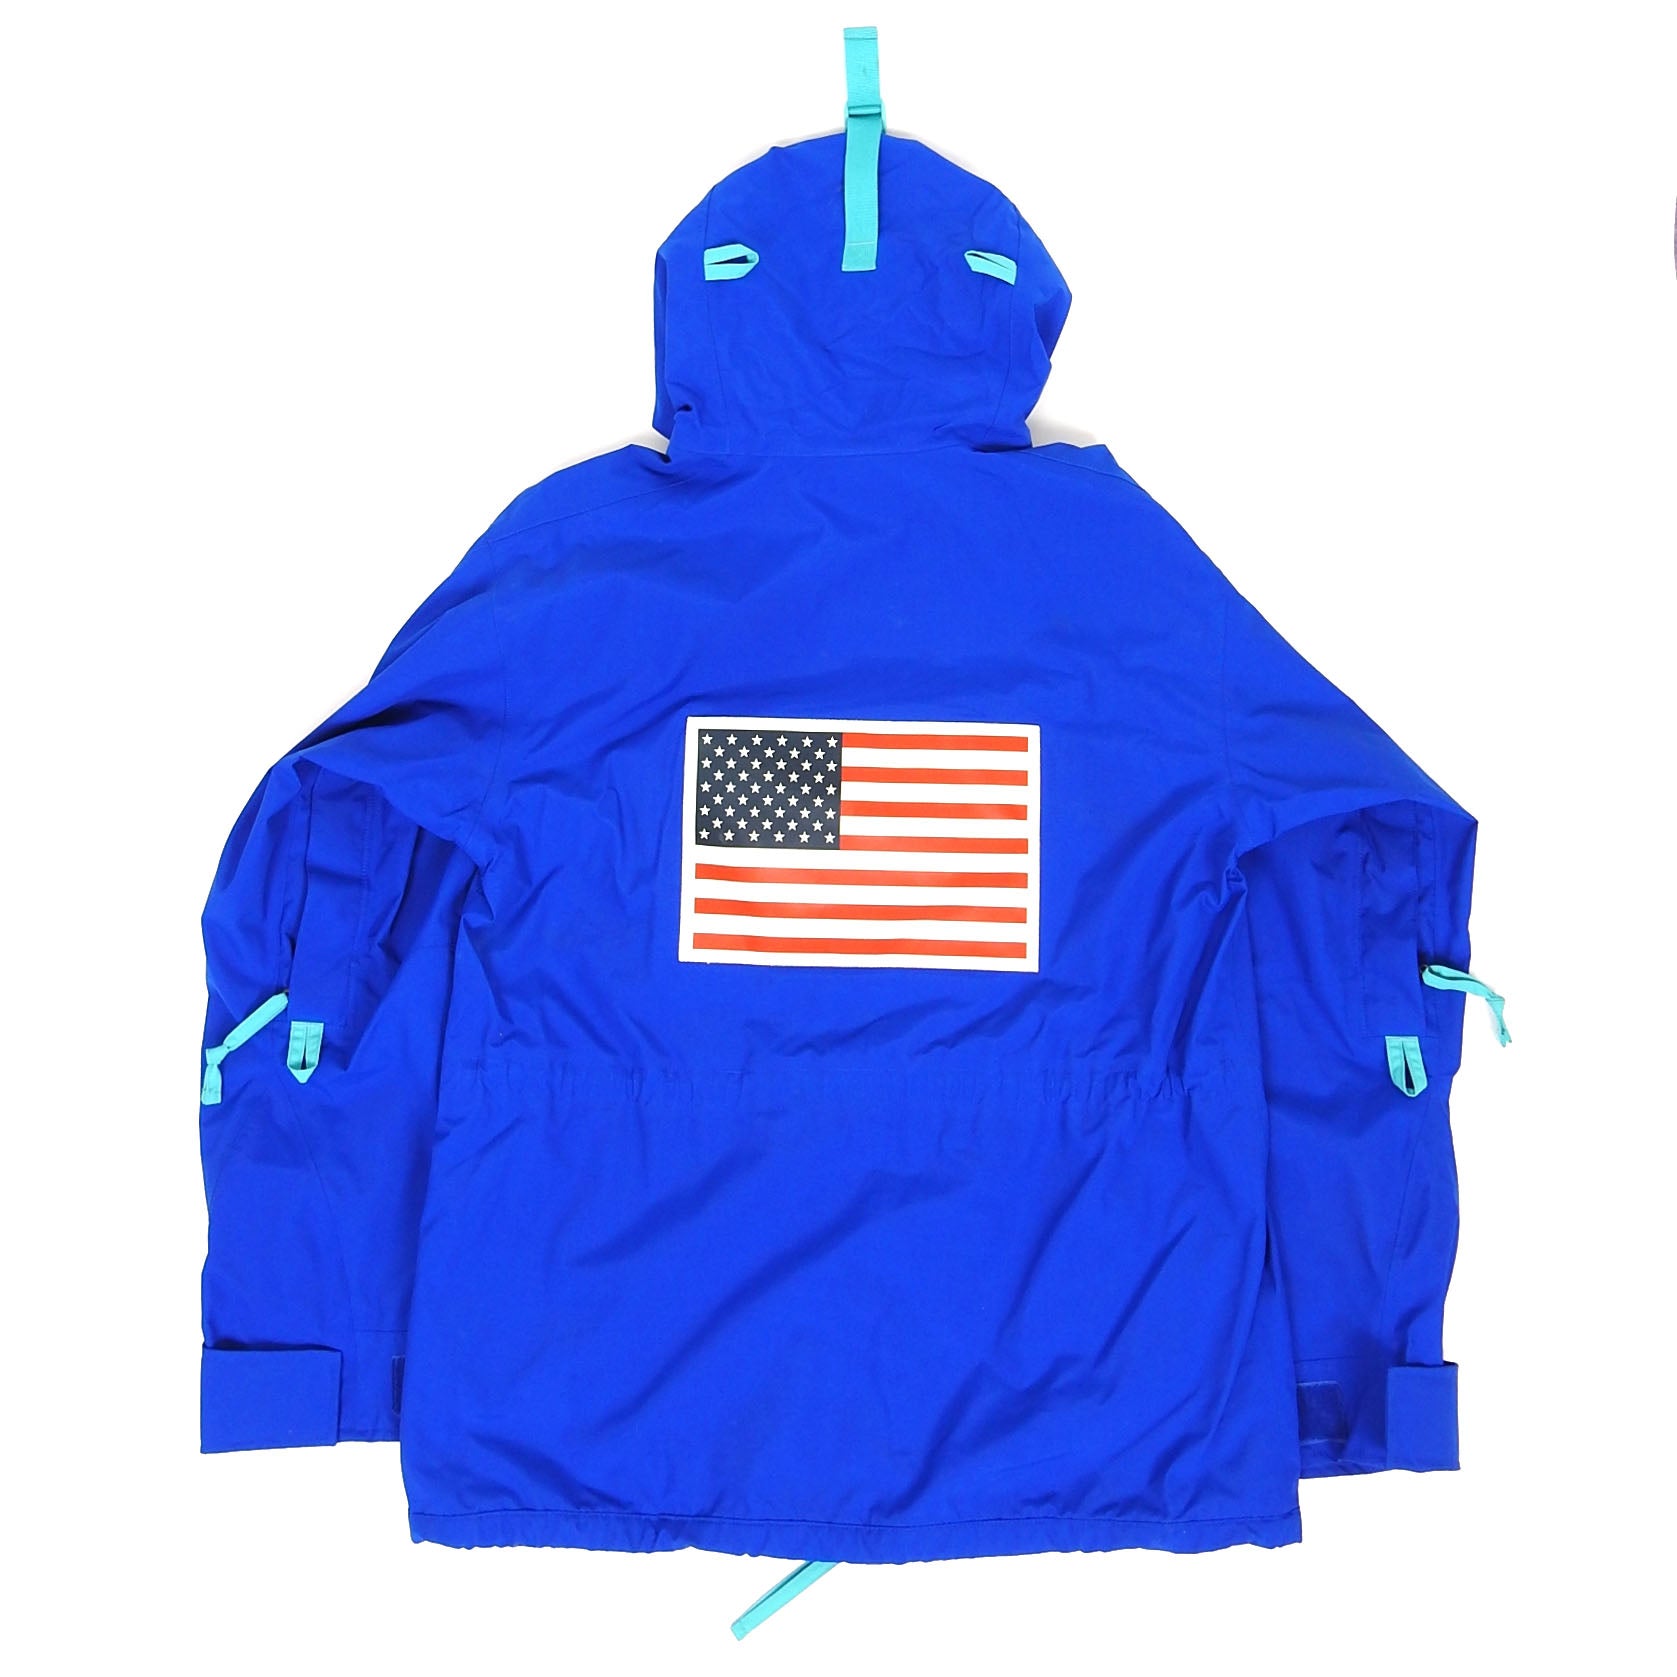 Supreme x The North Face Gore-tex Blue Expedition Pullover Jacket